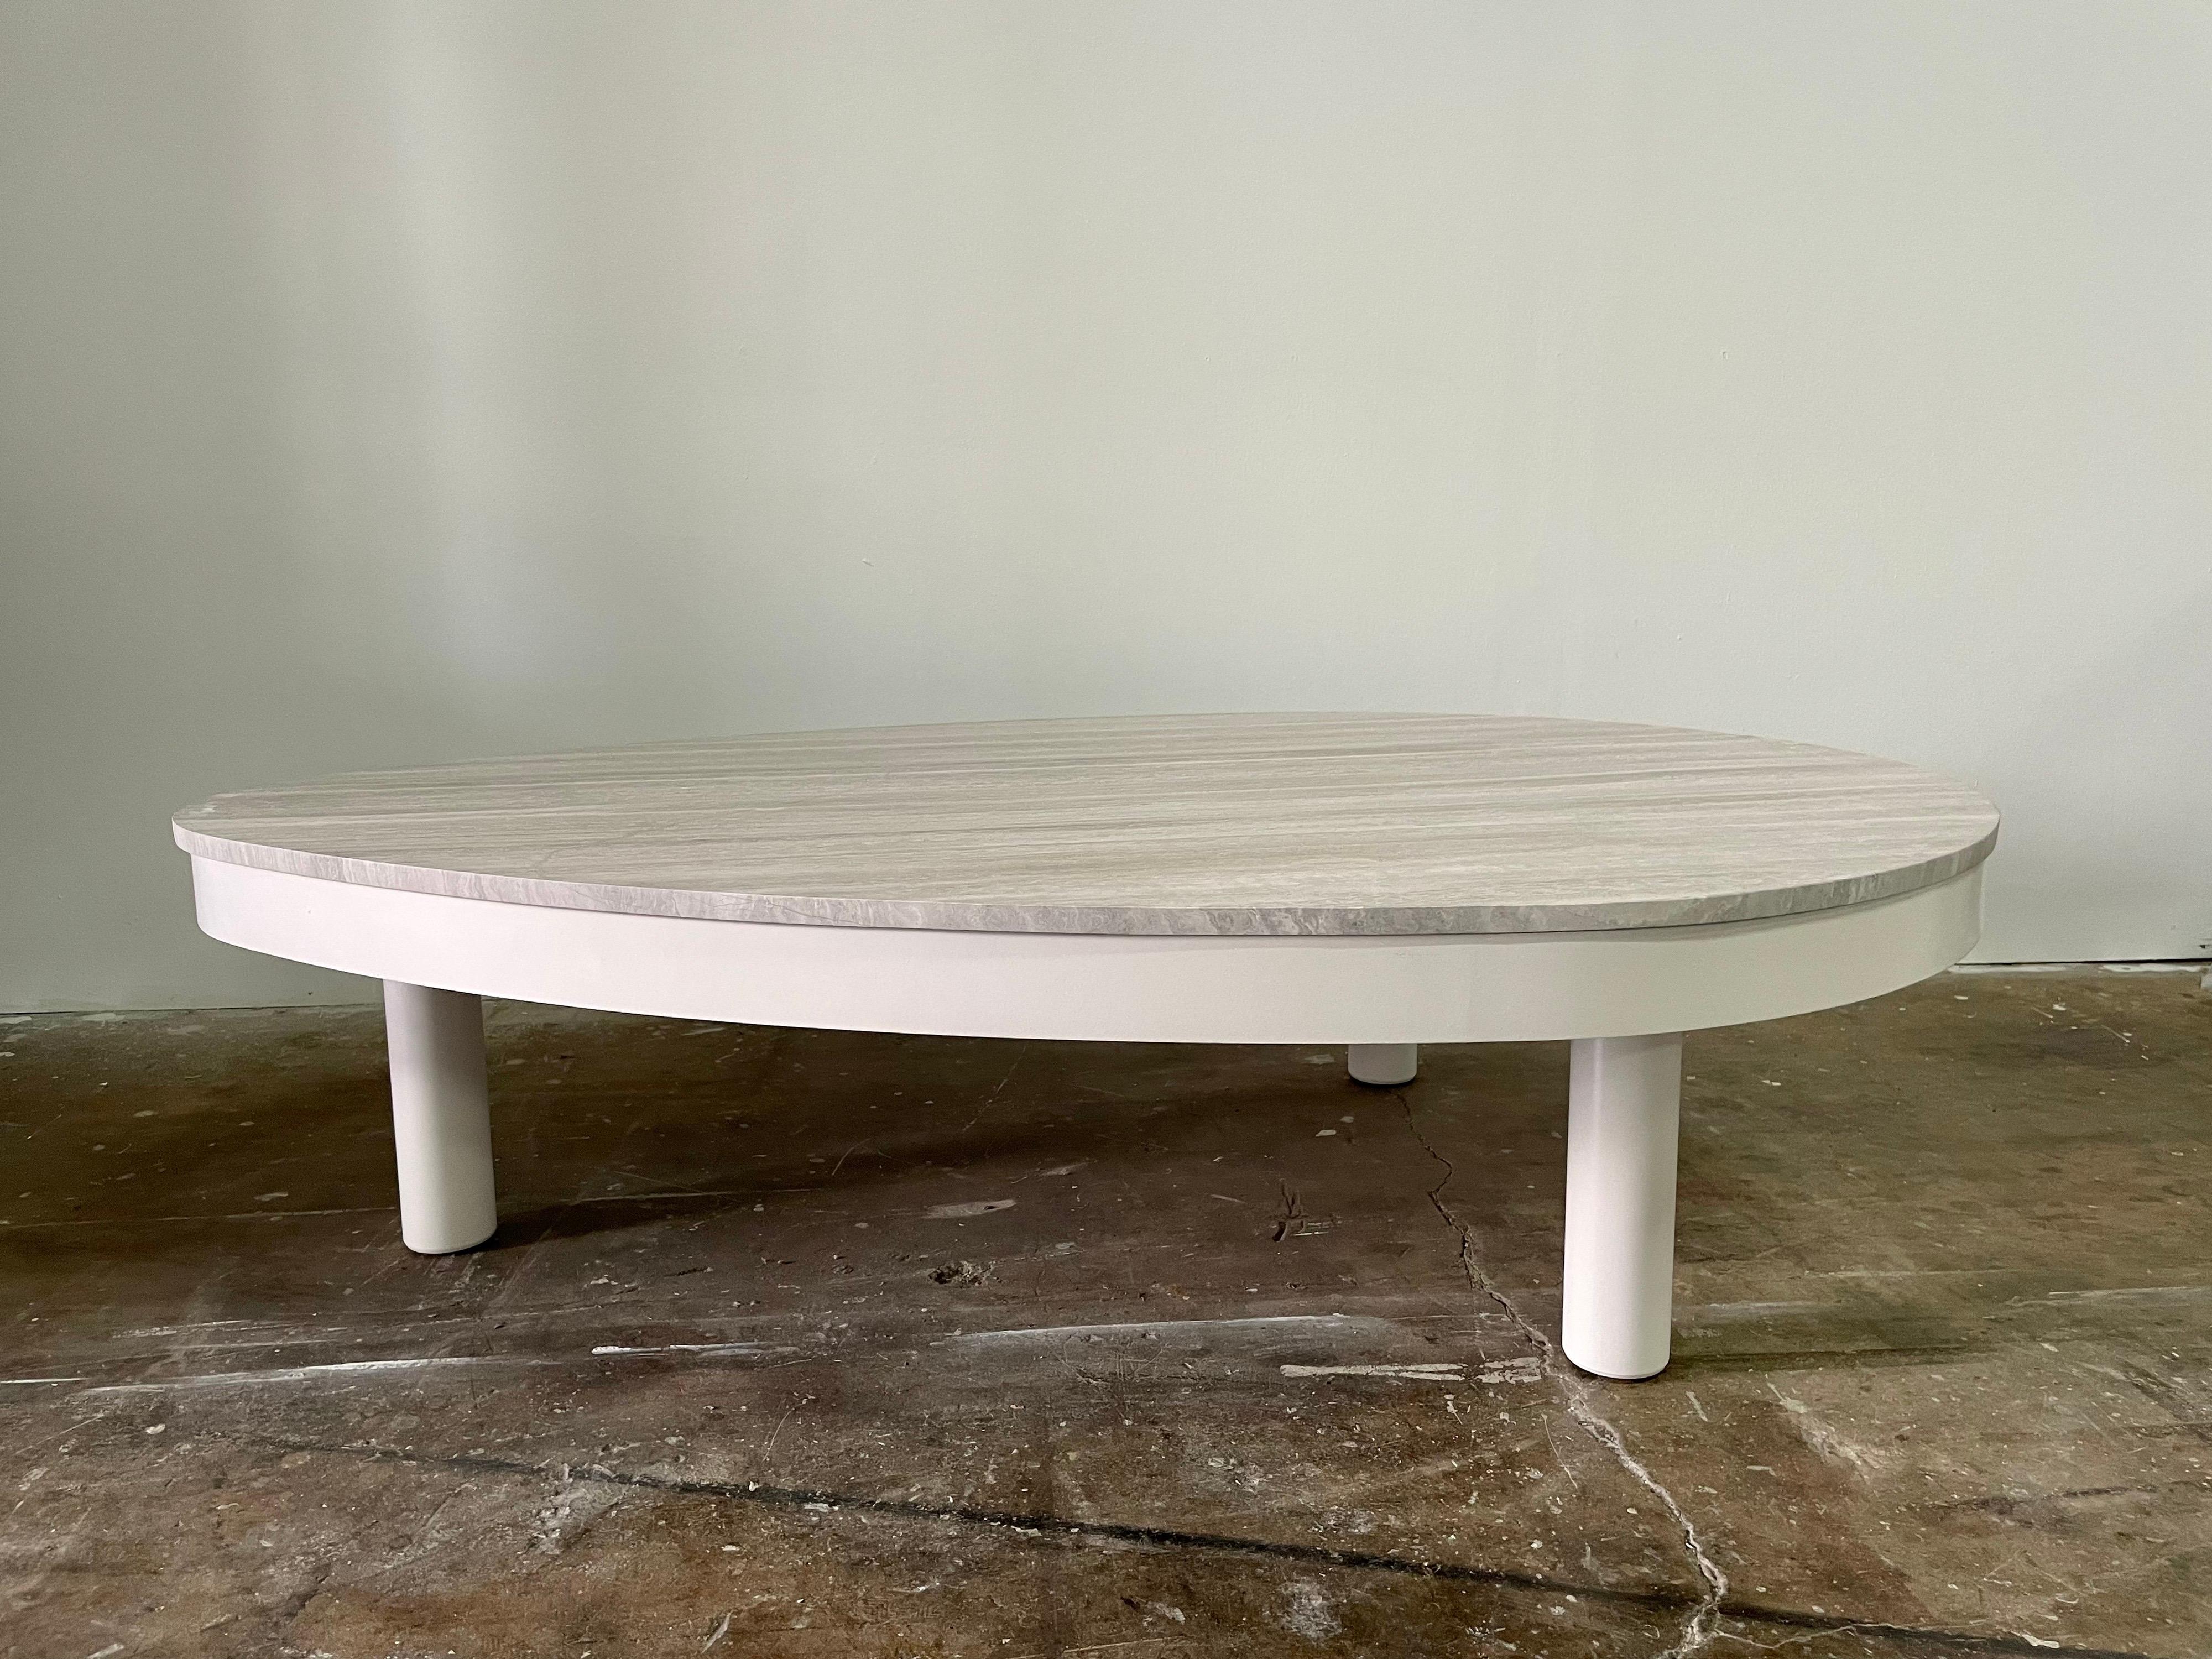 This is a fantastic French Modern biomorphic shaped cocktail table with a 3/4 inch thick slab of beautiful grey marble with a clean and classically chic look. The all wood base has three thick columns for legs and is in great condition. The base is